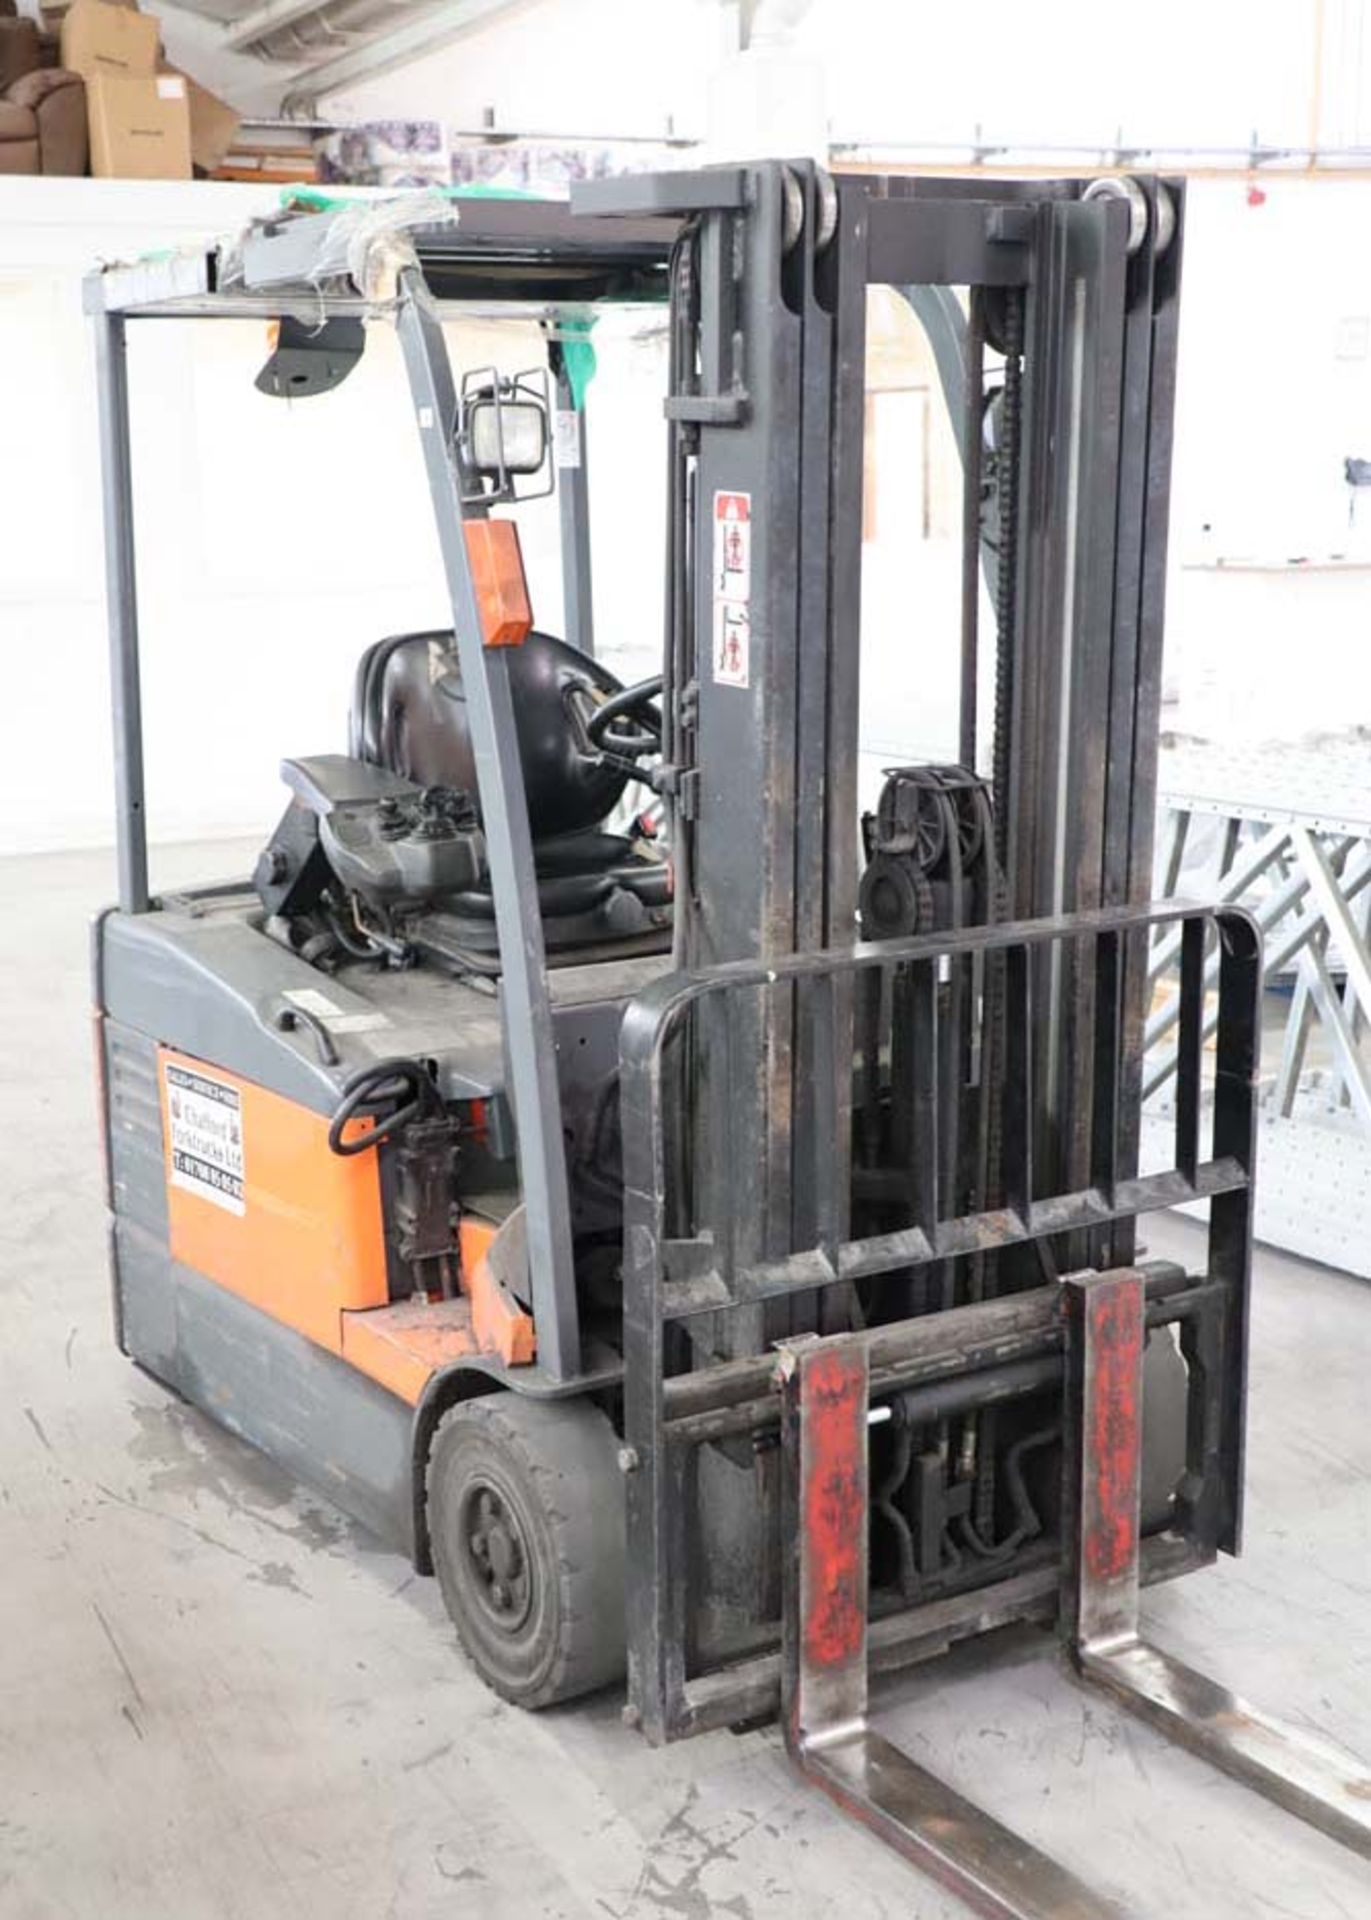 TOYOTA model E811 electric counterbalance forklift truck, 2007, capacity 1500kg with triple mast and